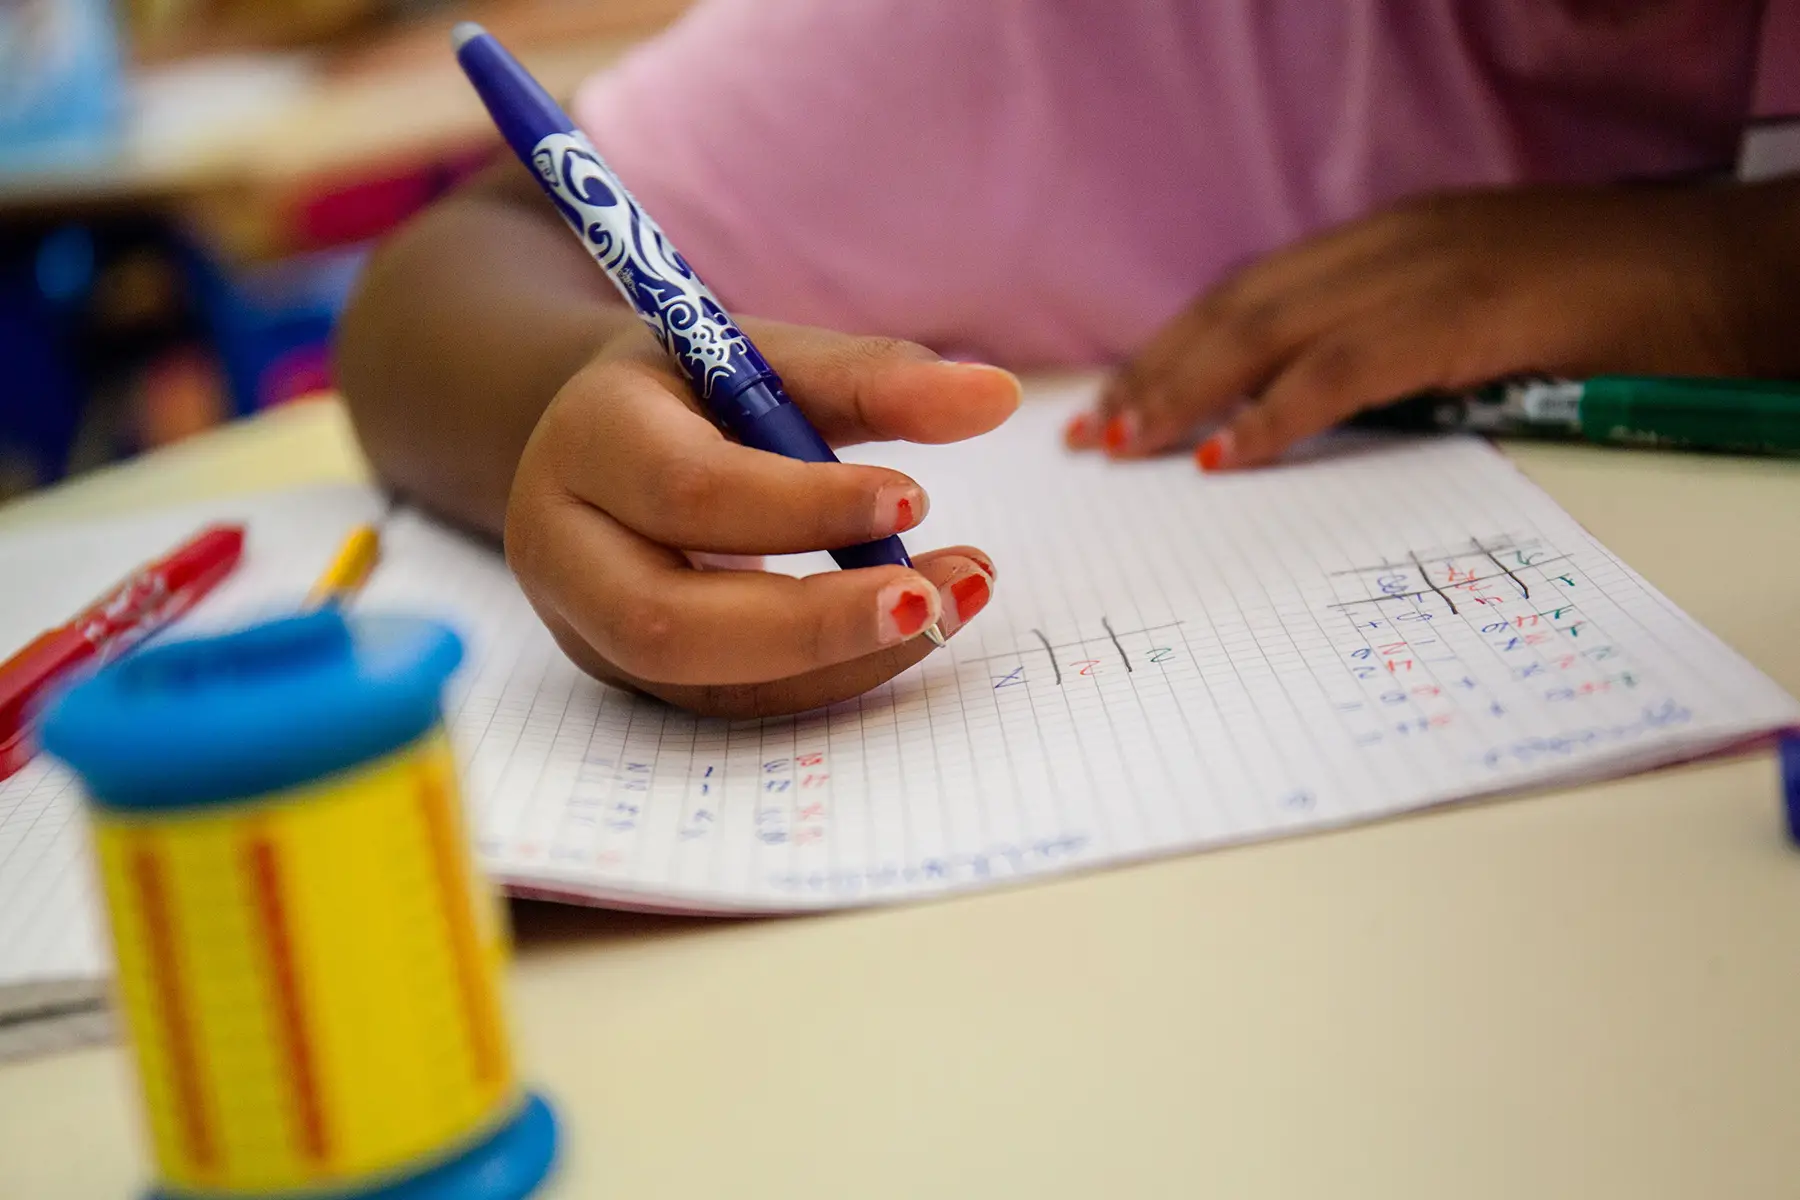 A close-up of a child writing in a math exercise book